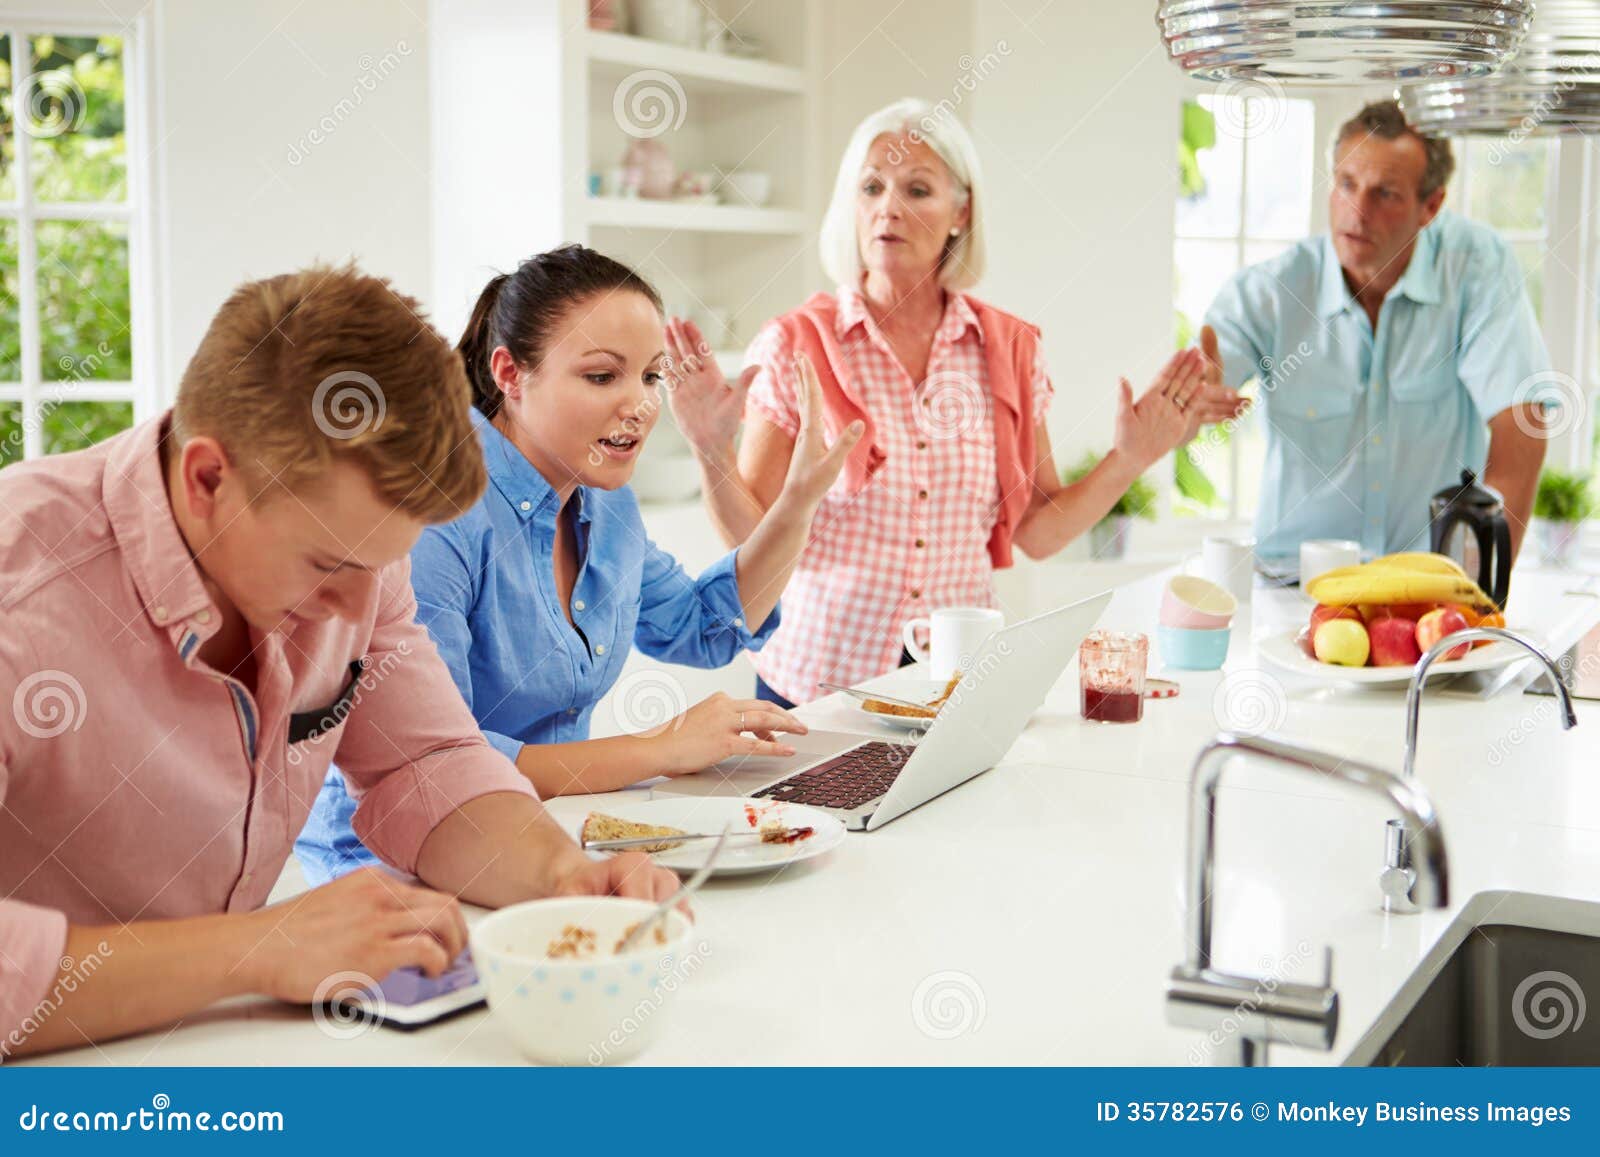 family with adult children having argument at breakfast